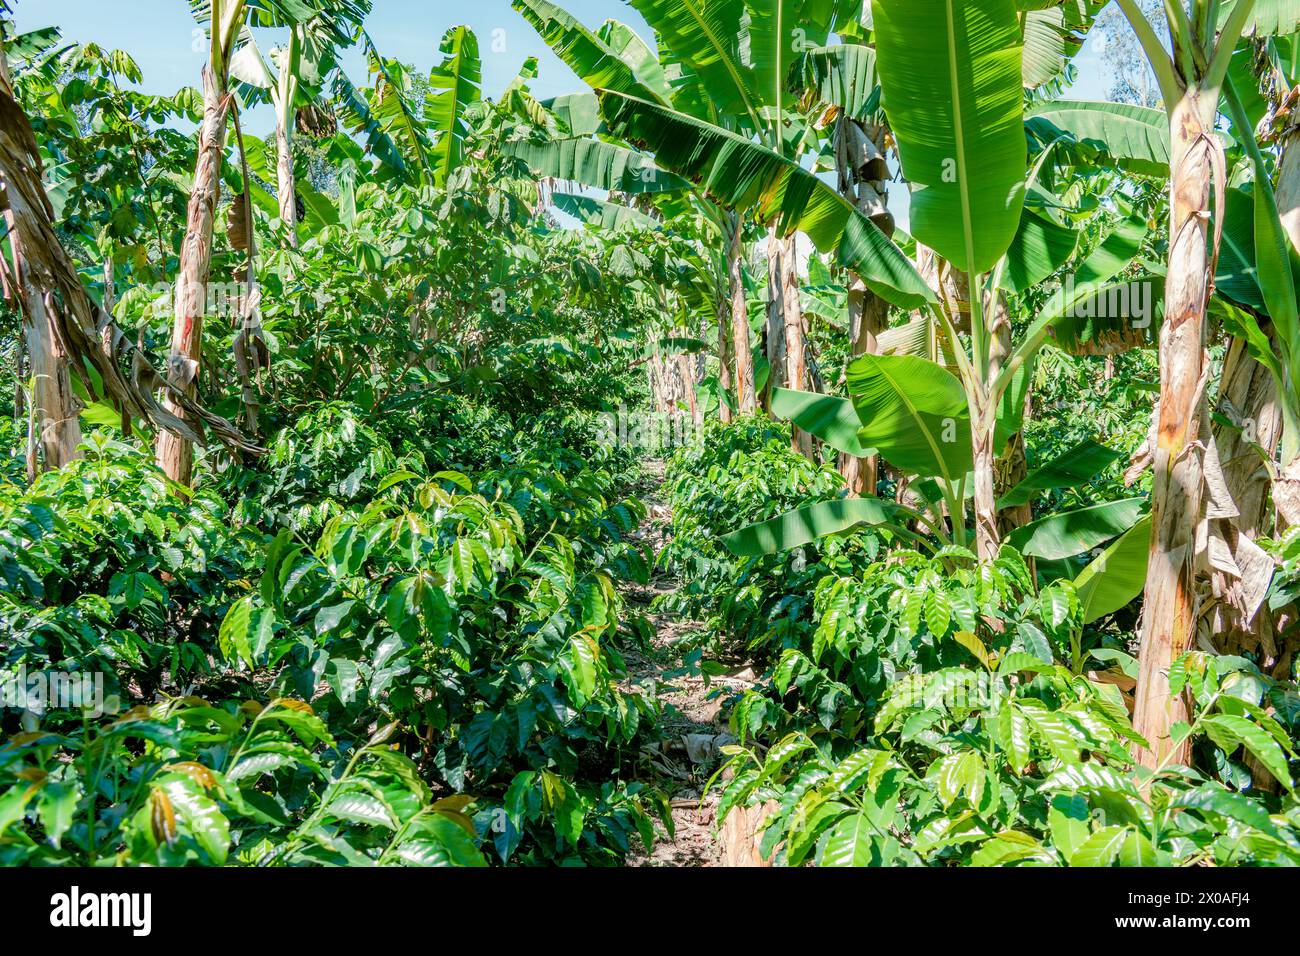 general view of a coffee and banana plantation in the mountains of Colombia Stock Photo